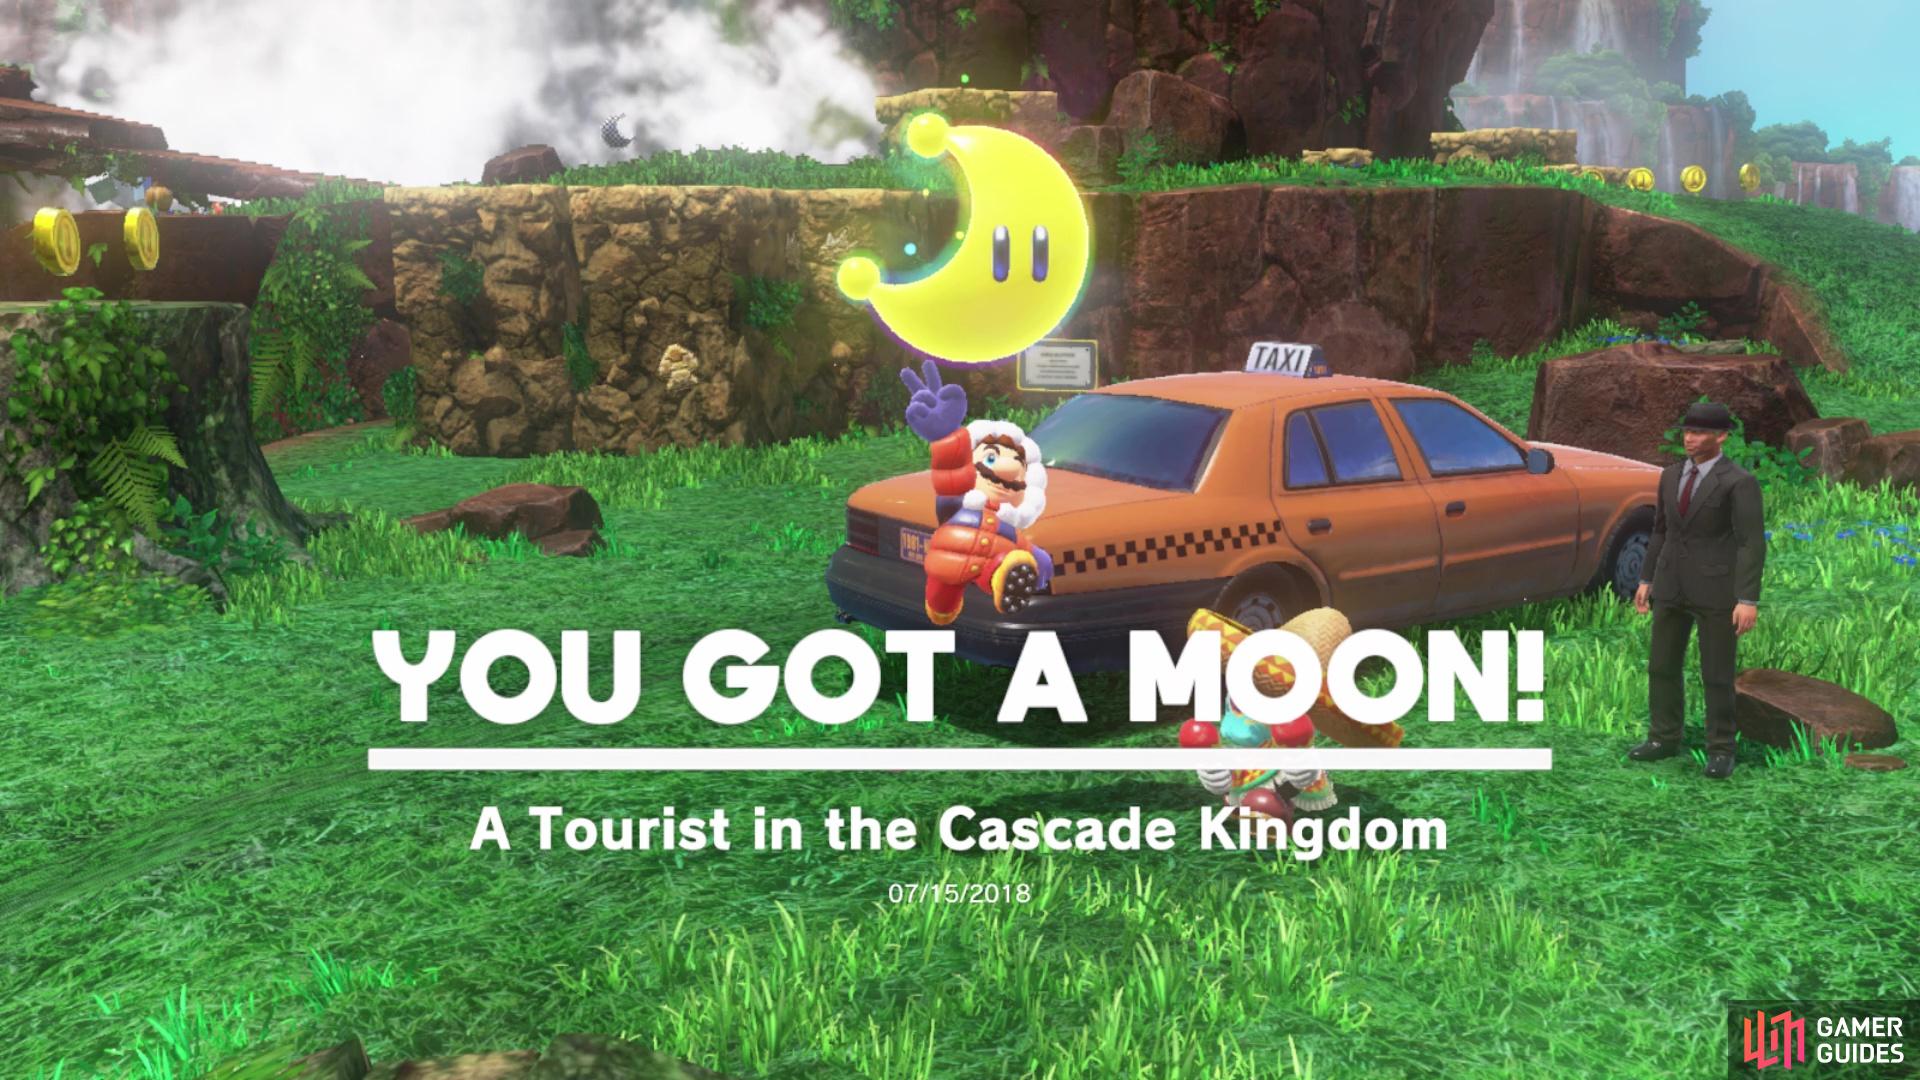 Speak with the tourist in Cascade Kingdom when you go through the painting to get a moon